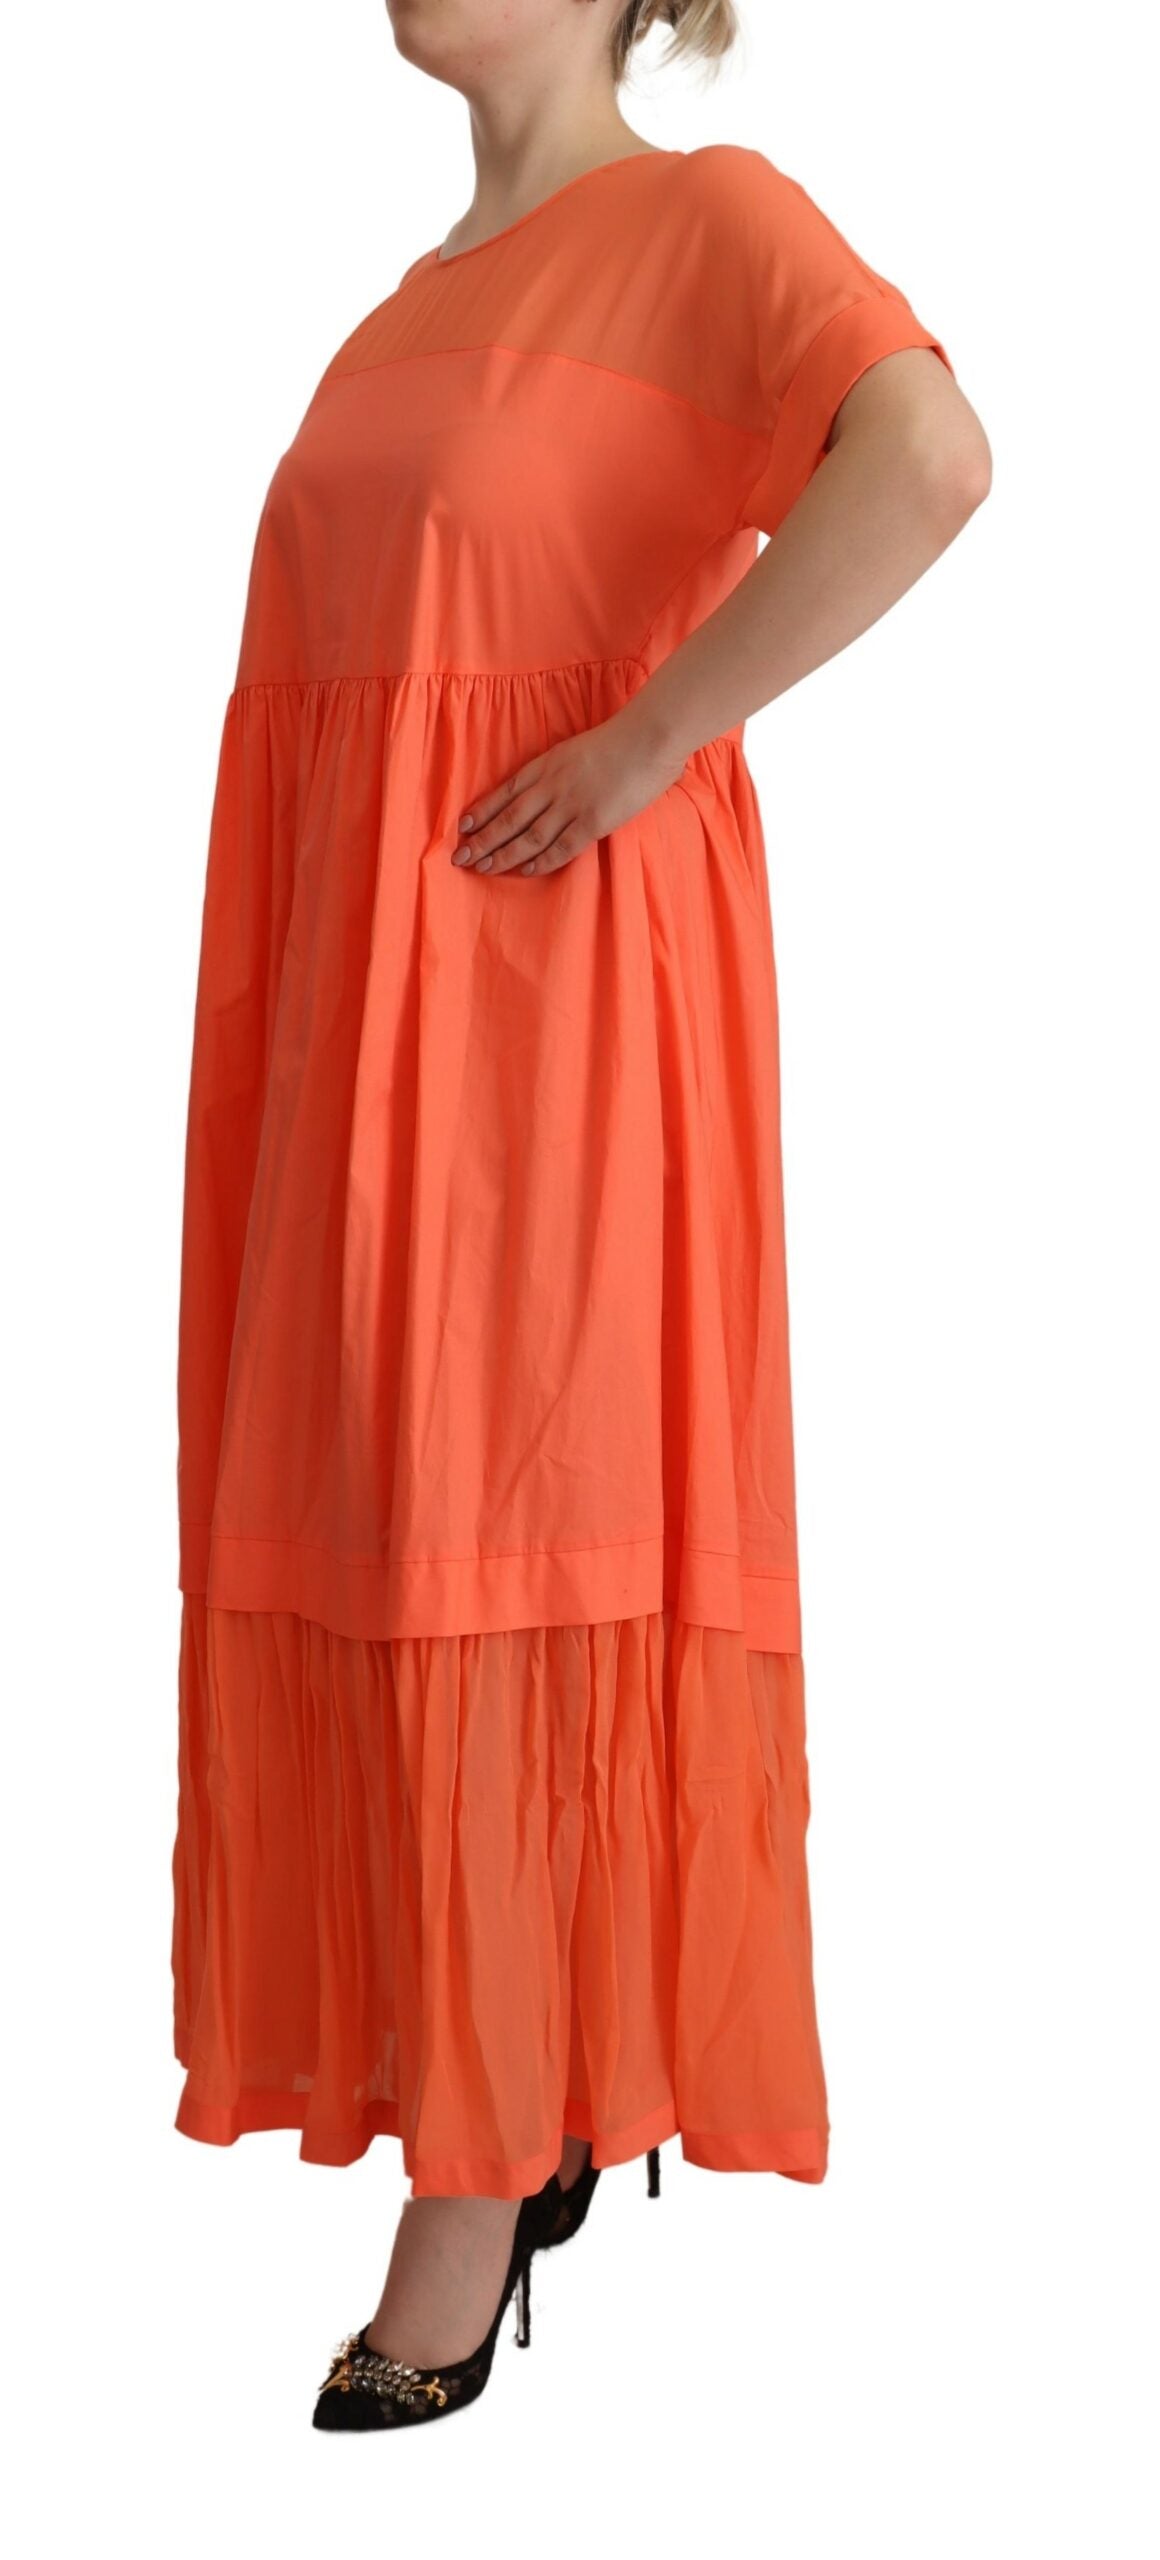 Twinset Elegant Coral Maxi Dress with Short Sleeves